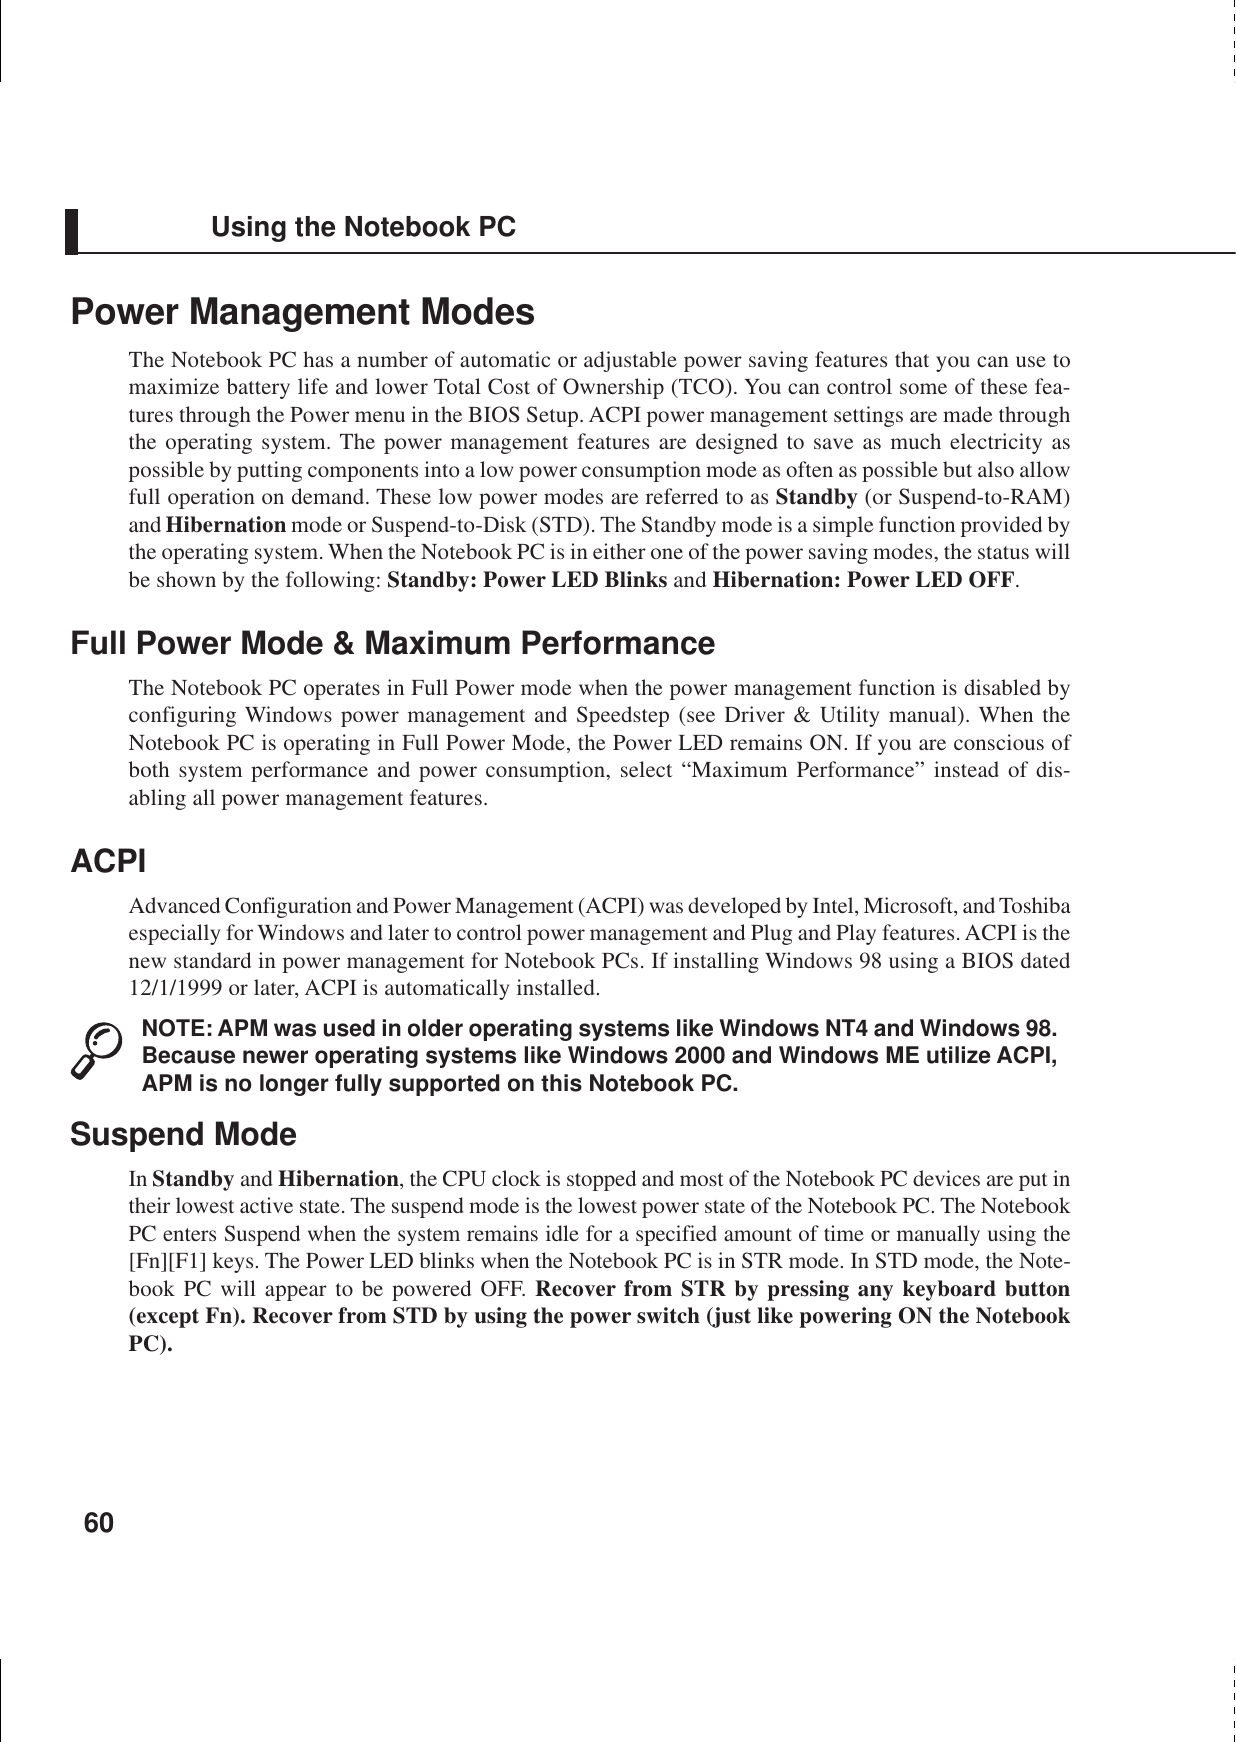 60Using the Notebook PCPower Management ModesThe Notebook PC has a number of automatic or adjustable power saving features that you can use tomaximize battery life and lower Total Cost of Ownership (TCO). You can control some of these fea-tures through the Power menu in the BIOS Setup. ACPI power management settings are made throughthe operating system. The power management features are designed to save as much electricity aspossible by putting components into a low power consumption mode as often as possible but also allowfull operation on demand. These low power modes are referred to as Standby (or Suspend-to-RAM)and Hibernation mode or Suspend-to-Disk (STD). The Standby mode is a simple function provided bythe operating system. When the Notebook PC is in either one of the power saving modes, the status willbe shown by the following: Standby: Power LED Blinks and Hibernation: Power LED OFF.Full Power Mode &amp; Maximum PerformanceThe Notebook PC operates in Full Power mode when the power management function is disabled byconfiguring Windows power management and Speedstep (see Driver &amp; Utility manual). When theNotebook PC is operating in Full Power Mode, the Power LED remains ON. If you are conscious ofboth system performance and power consumption, select “Maximum Performance” instead of dis-abling all power management features.ACPIAdvanced Configuration and Power Management (ACPI) was developed by Intel, Microsoft, and Toshibaespecially for Windows and later to control power management and Plug and Play features. ACPI is thenew standard in power management for Notebook PCs. If installing Windows 98 using a BIOS dated12/1/1999 or later, ACPI is automatically installed.NOTE: APM was used in older operating systems like Windows NT4 and Windows 98.Because newer operating systems like Windows 2000 and Windows ME utilize ACPI,APM is no longer fully supported on this Notebook PC.Suspend ModeIn Standby and Hibernation, the CPU clock is stopped and most of the Notebook PC devices are put intheir lowest active state. The suspend mode is the lowest power state of the Notebook PC. The NotebookPC enters Suspend when the system remains idle for a specified amount of time or manually using the[Fn][F1] keys. The Power LED blinks when the Notebook PC is in STR mode. In STD mode, the Note-book PC will appear to be powered OFF. Recover from STR by pressing any keyboard button(except Fn). Recover from STD by using the power switch (just like powering ON the NotebookPC).